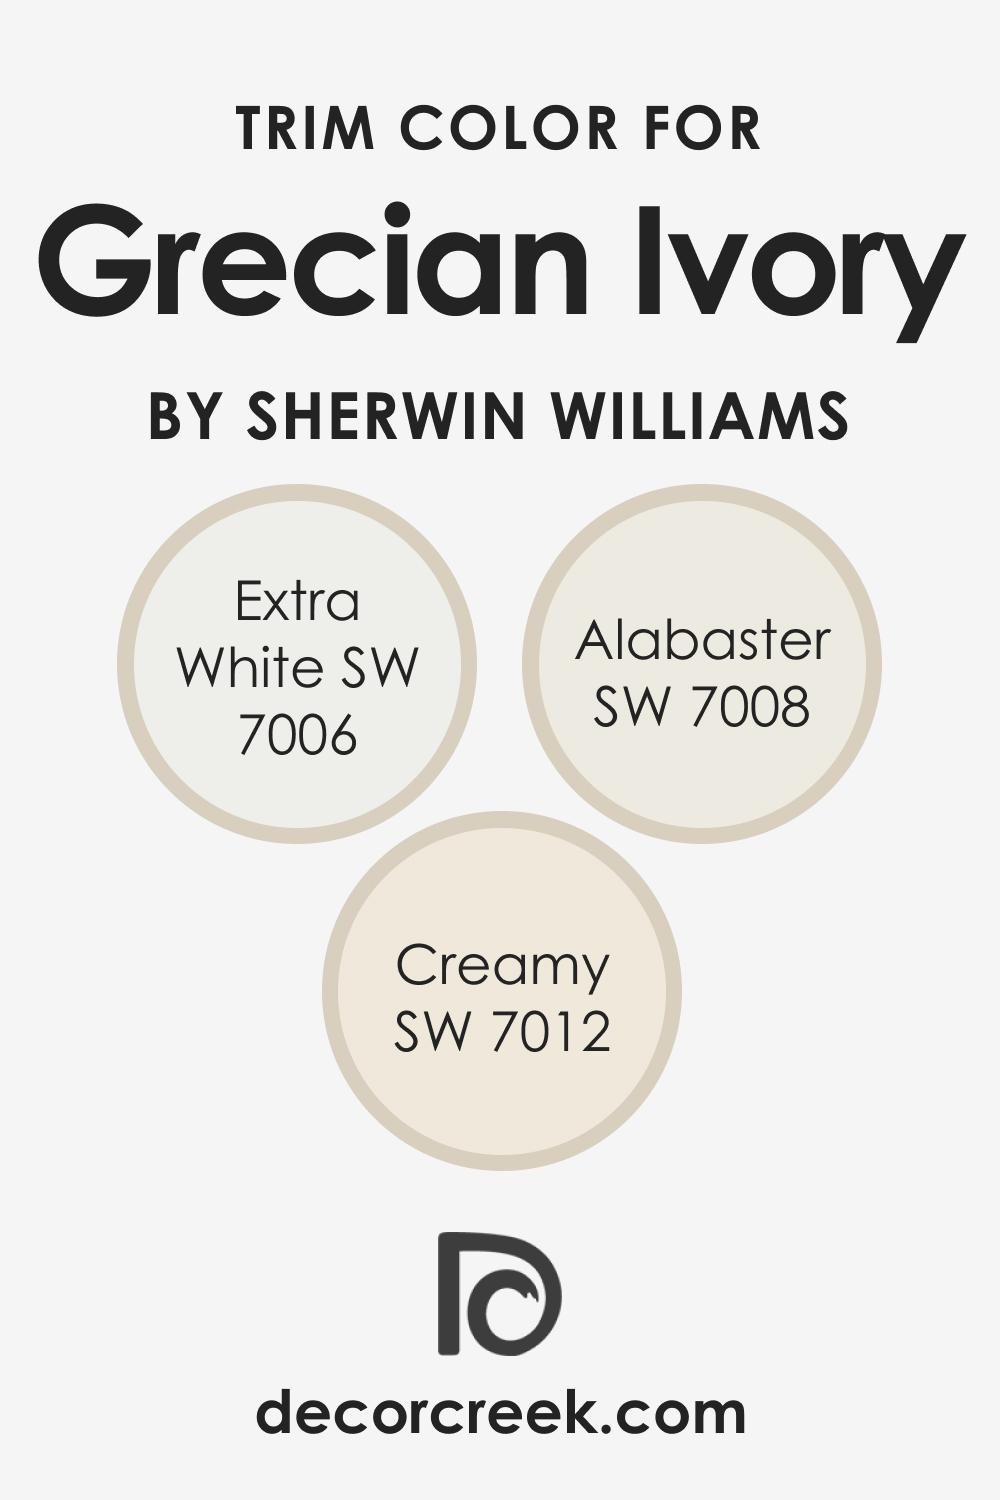 Trim Colors of SW 7541 Grecian Ivory